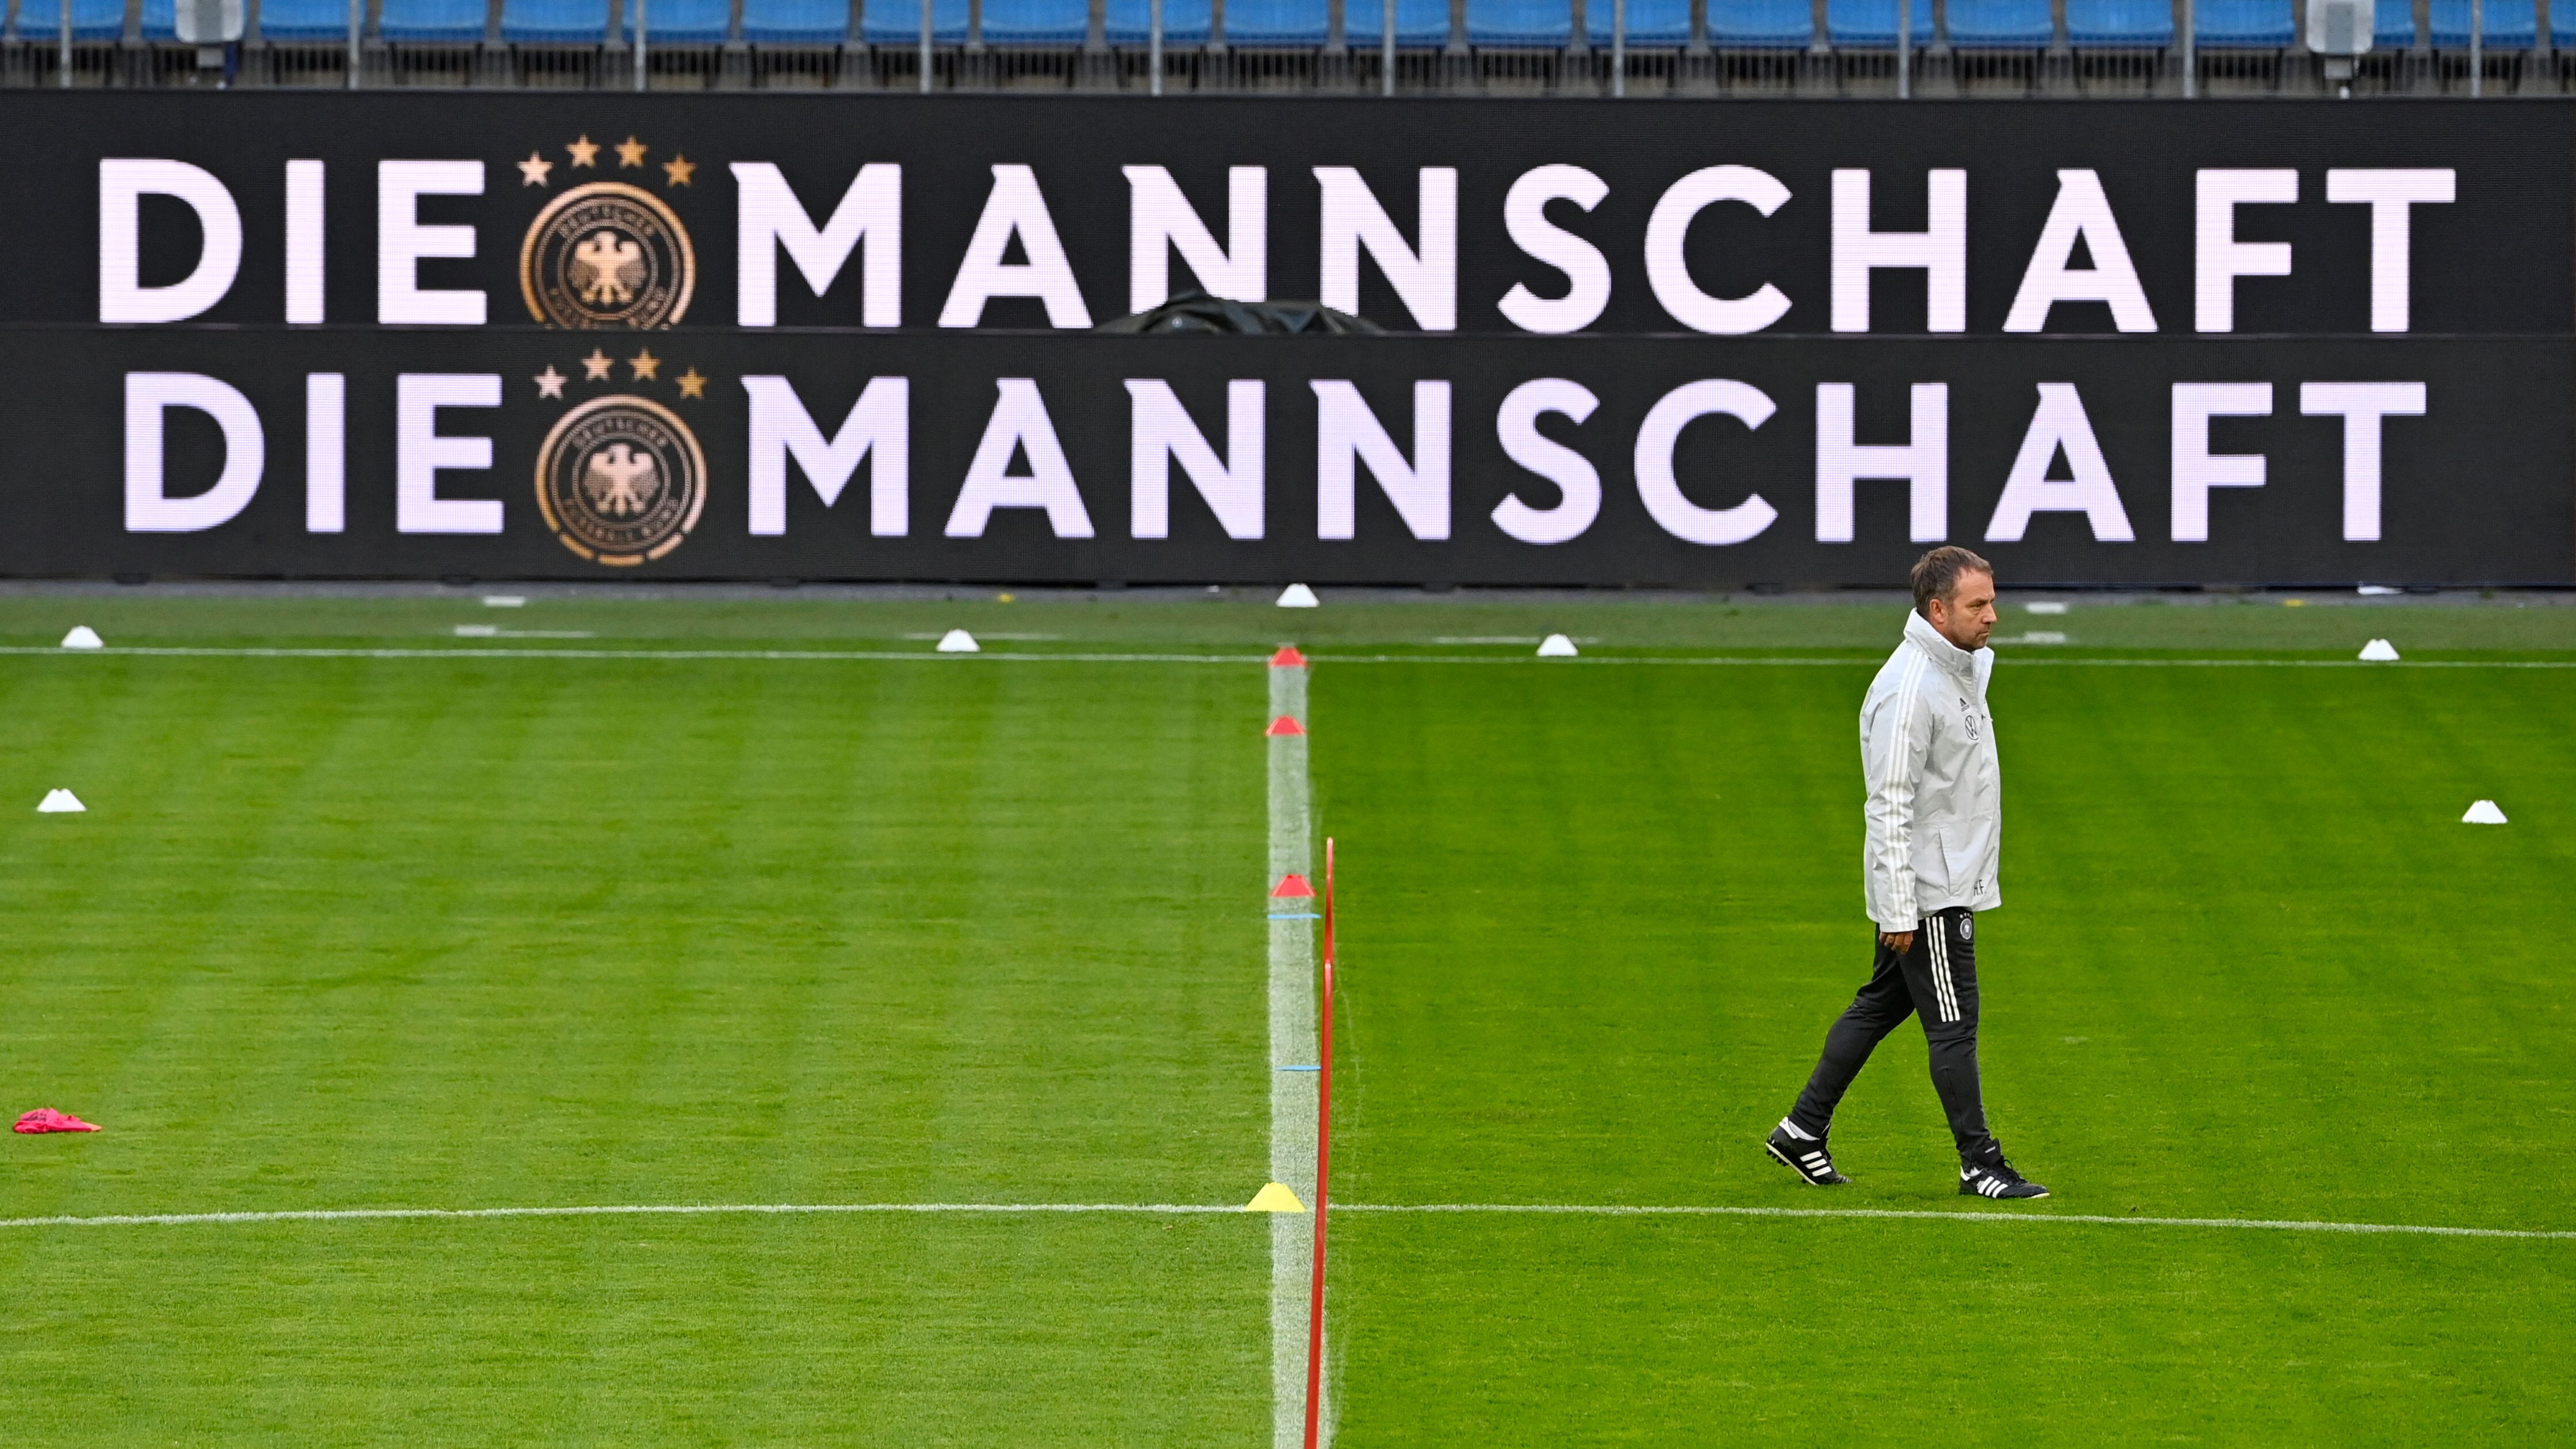 (FILES) Germany's head coach Hans-Dieter Flick walks across the pitch during a training session on October 7, 2021 in Hamburg, northern Germany, before the team's 2022 FIFA World Cup Group J qualification football match against Romania on October 8. Germany's coach Hansi Flick was fired just nine months from hosting Euro 2024 after Saturday's 4-1 thumping by Japan in Wolfsburg, the German FA (DFB) announced on September 10, 2023. The Germans were thoroughly outclassed by the Samurai Blue on home soil in the friendly, with only some acrobatic 'keeping from Marc-Andre ter Stegen preventing the score from eclipsing 2001's 5-1 loss to England in Munich. (Photo by John MACDOUGALL / AFP)